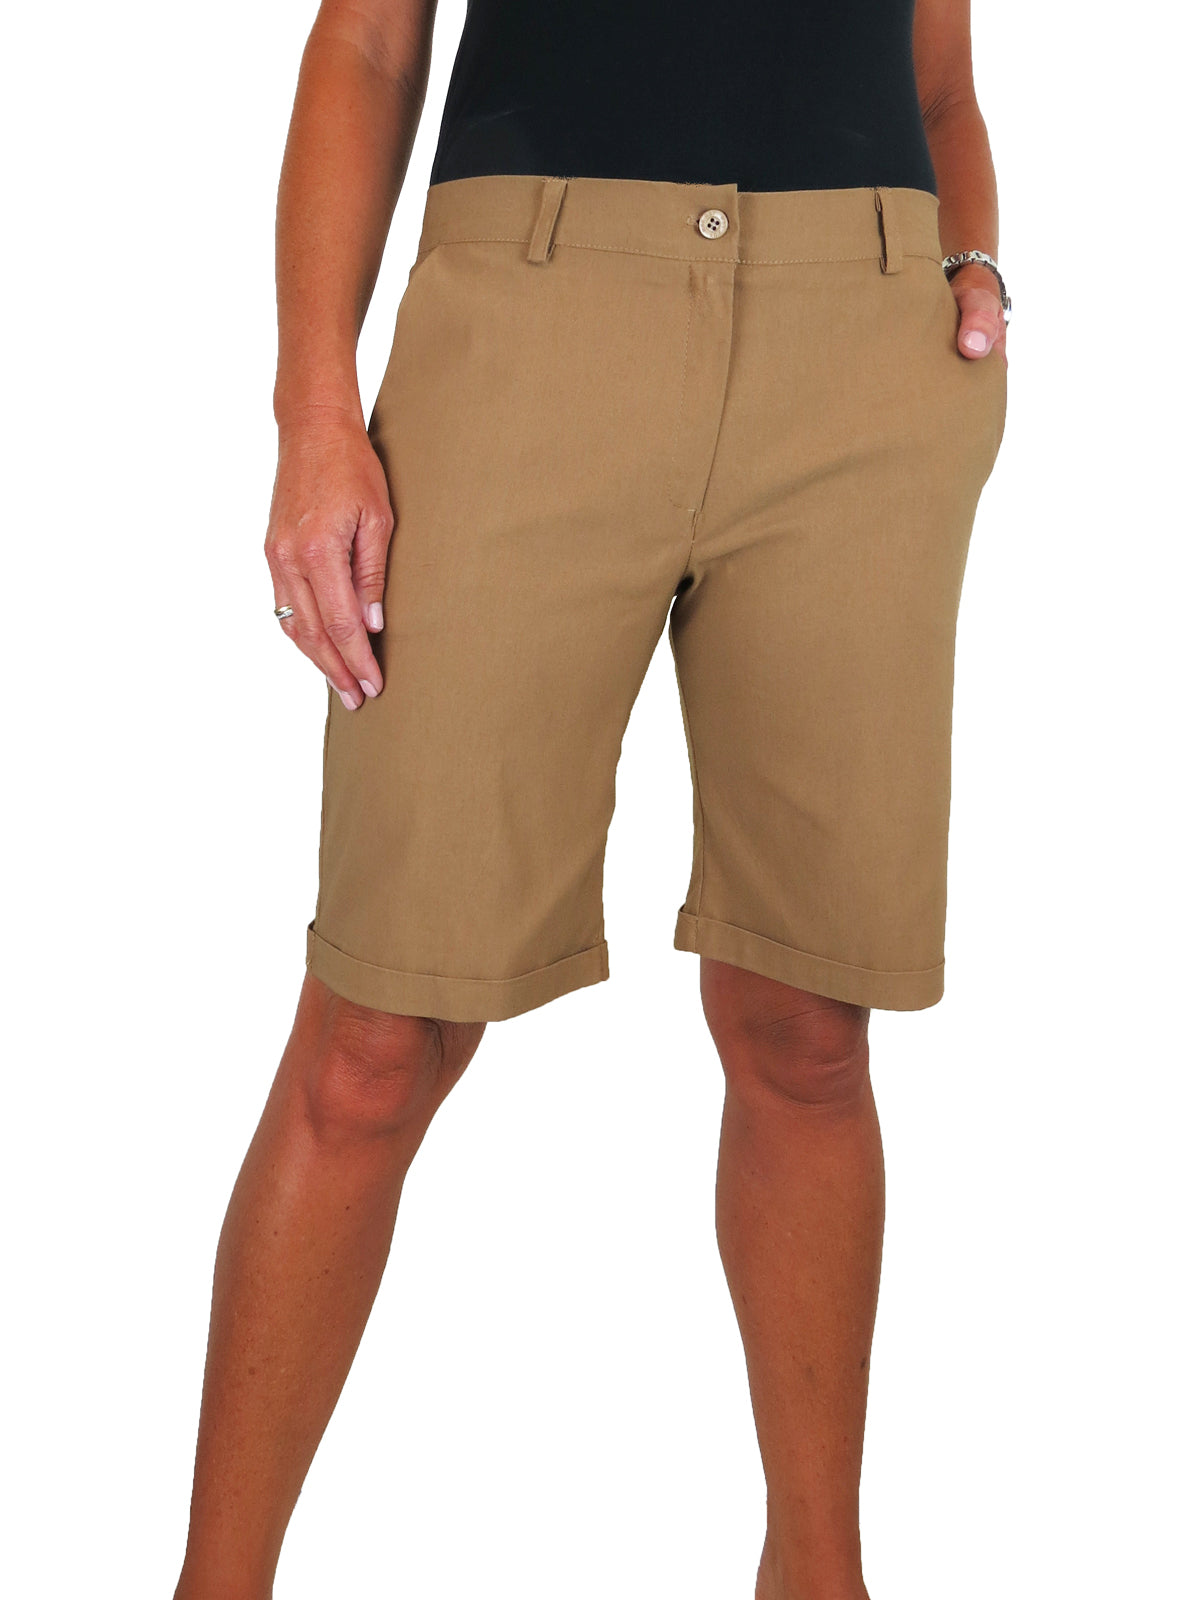 Ladies Above The Knee Stretch Shorts Camel Beige